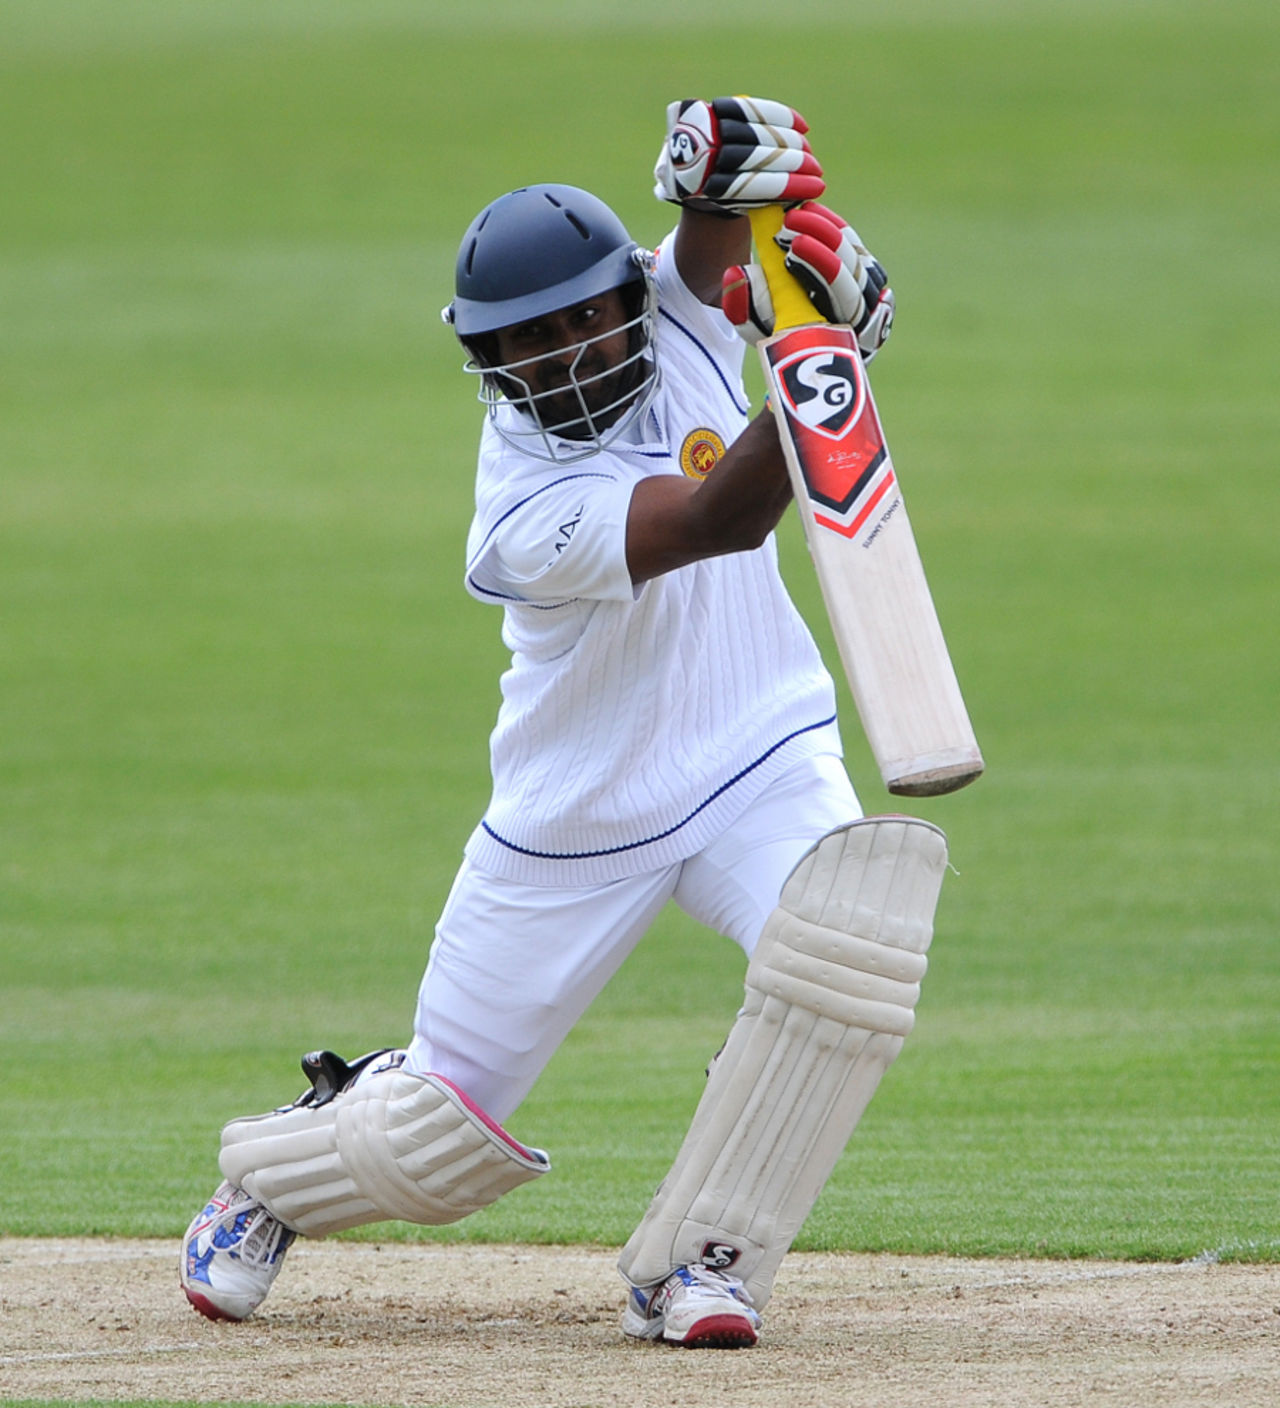 Kaushal Silva played a compact innings, Northamptonshire v Sri Lankans, Tour match, Wantage Road, 1st day, June 5, 2014